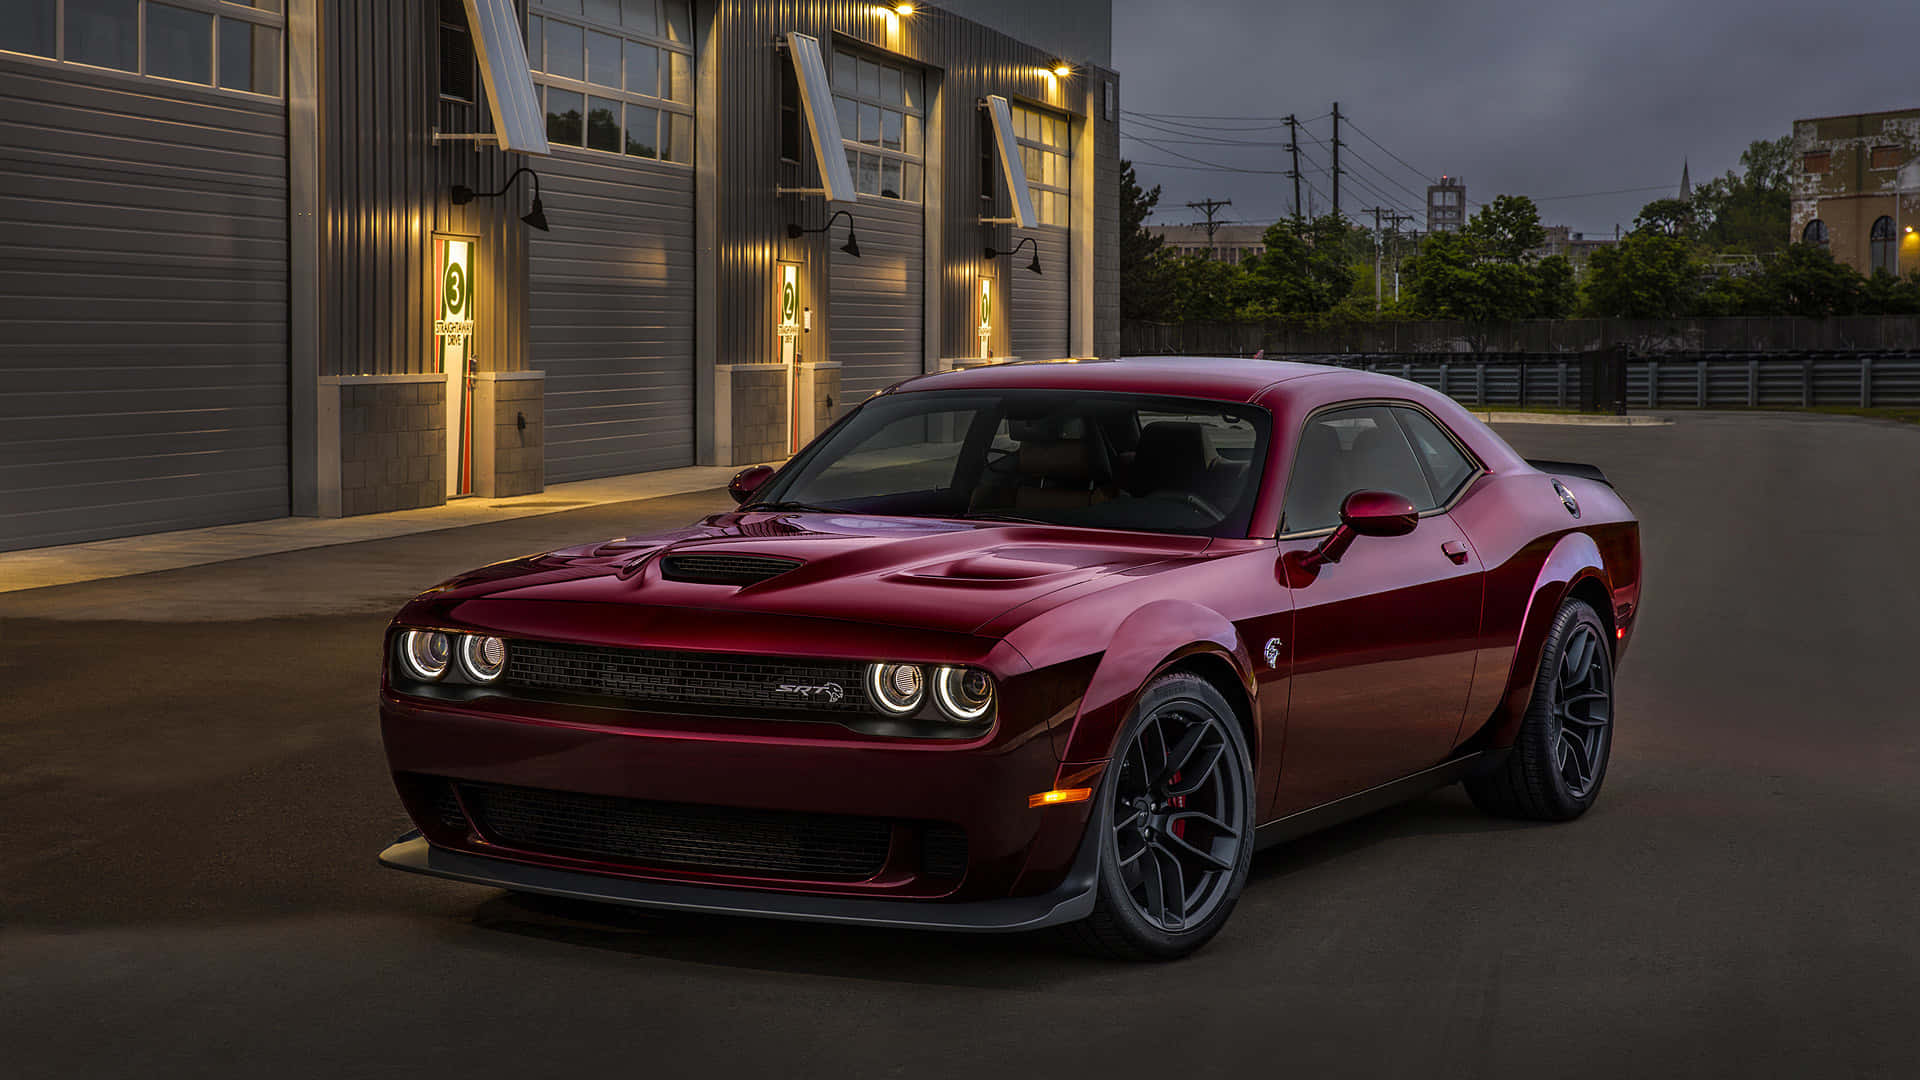 The Red 2019 Dodge Challenger Srt Is Parked In Front Of A Garage Wallpaper